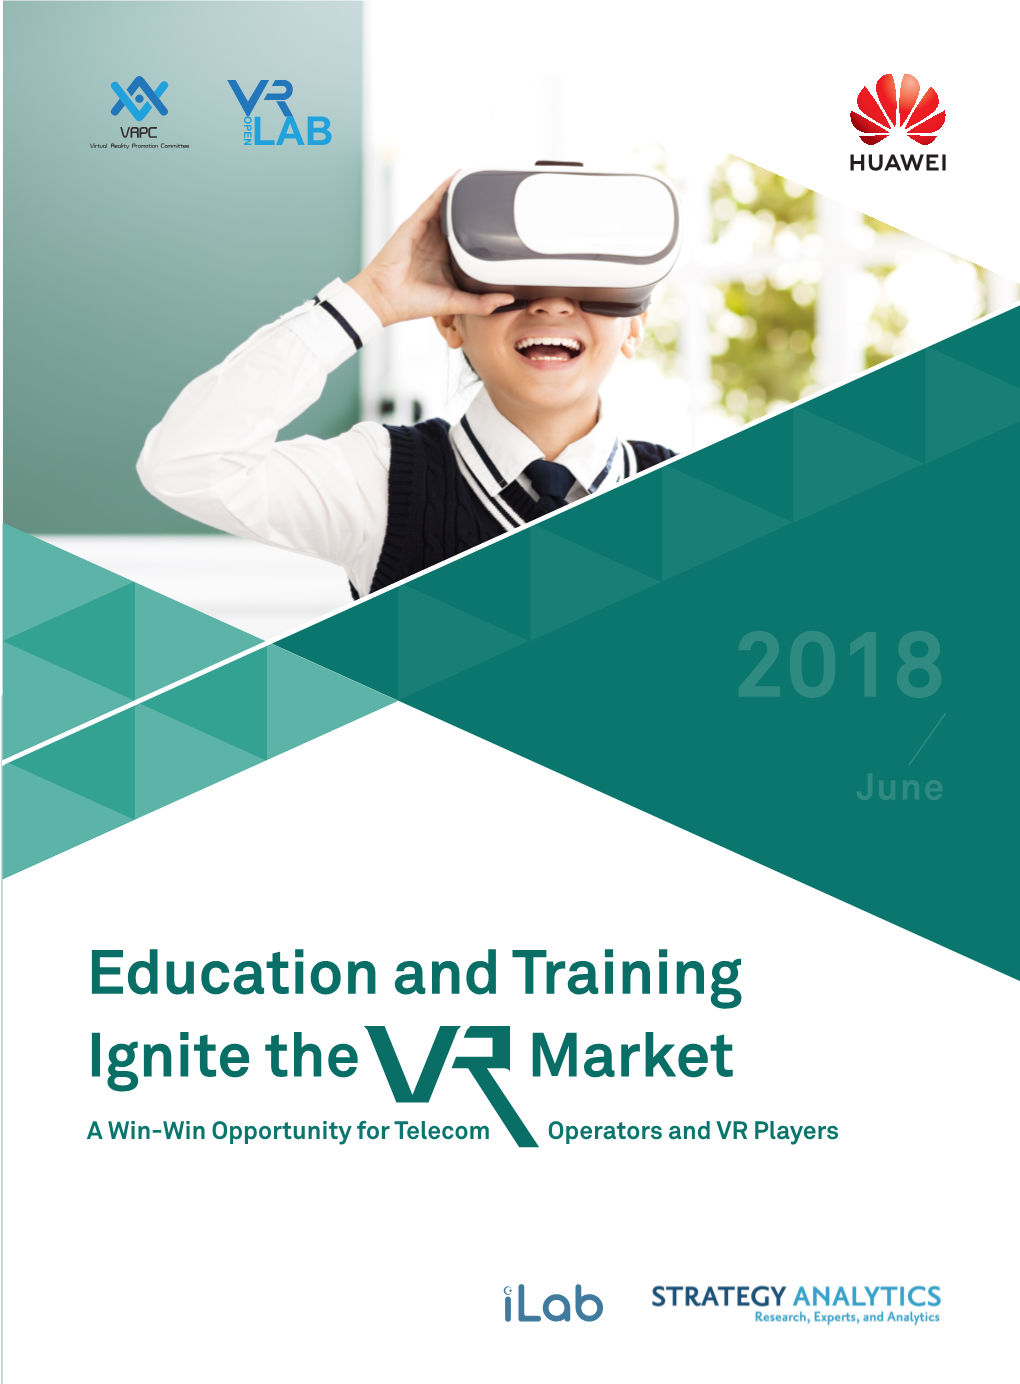 Education and Training Ignite the Market a Win-Win Opportunity for Telecom Operators and VR Players Contents